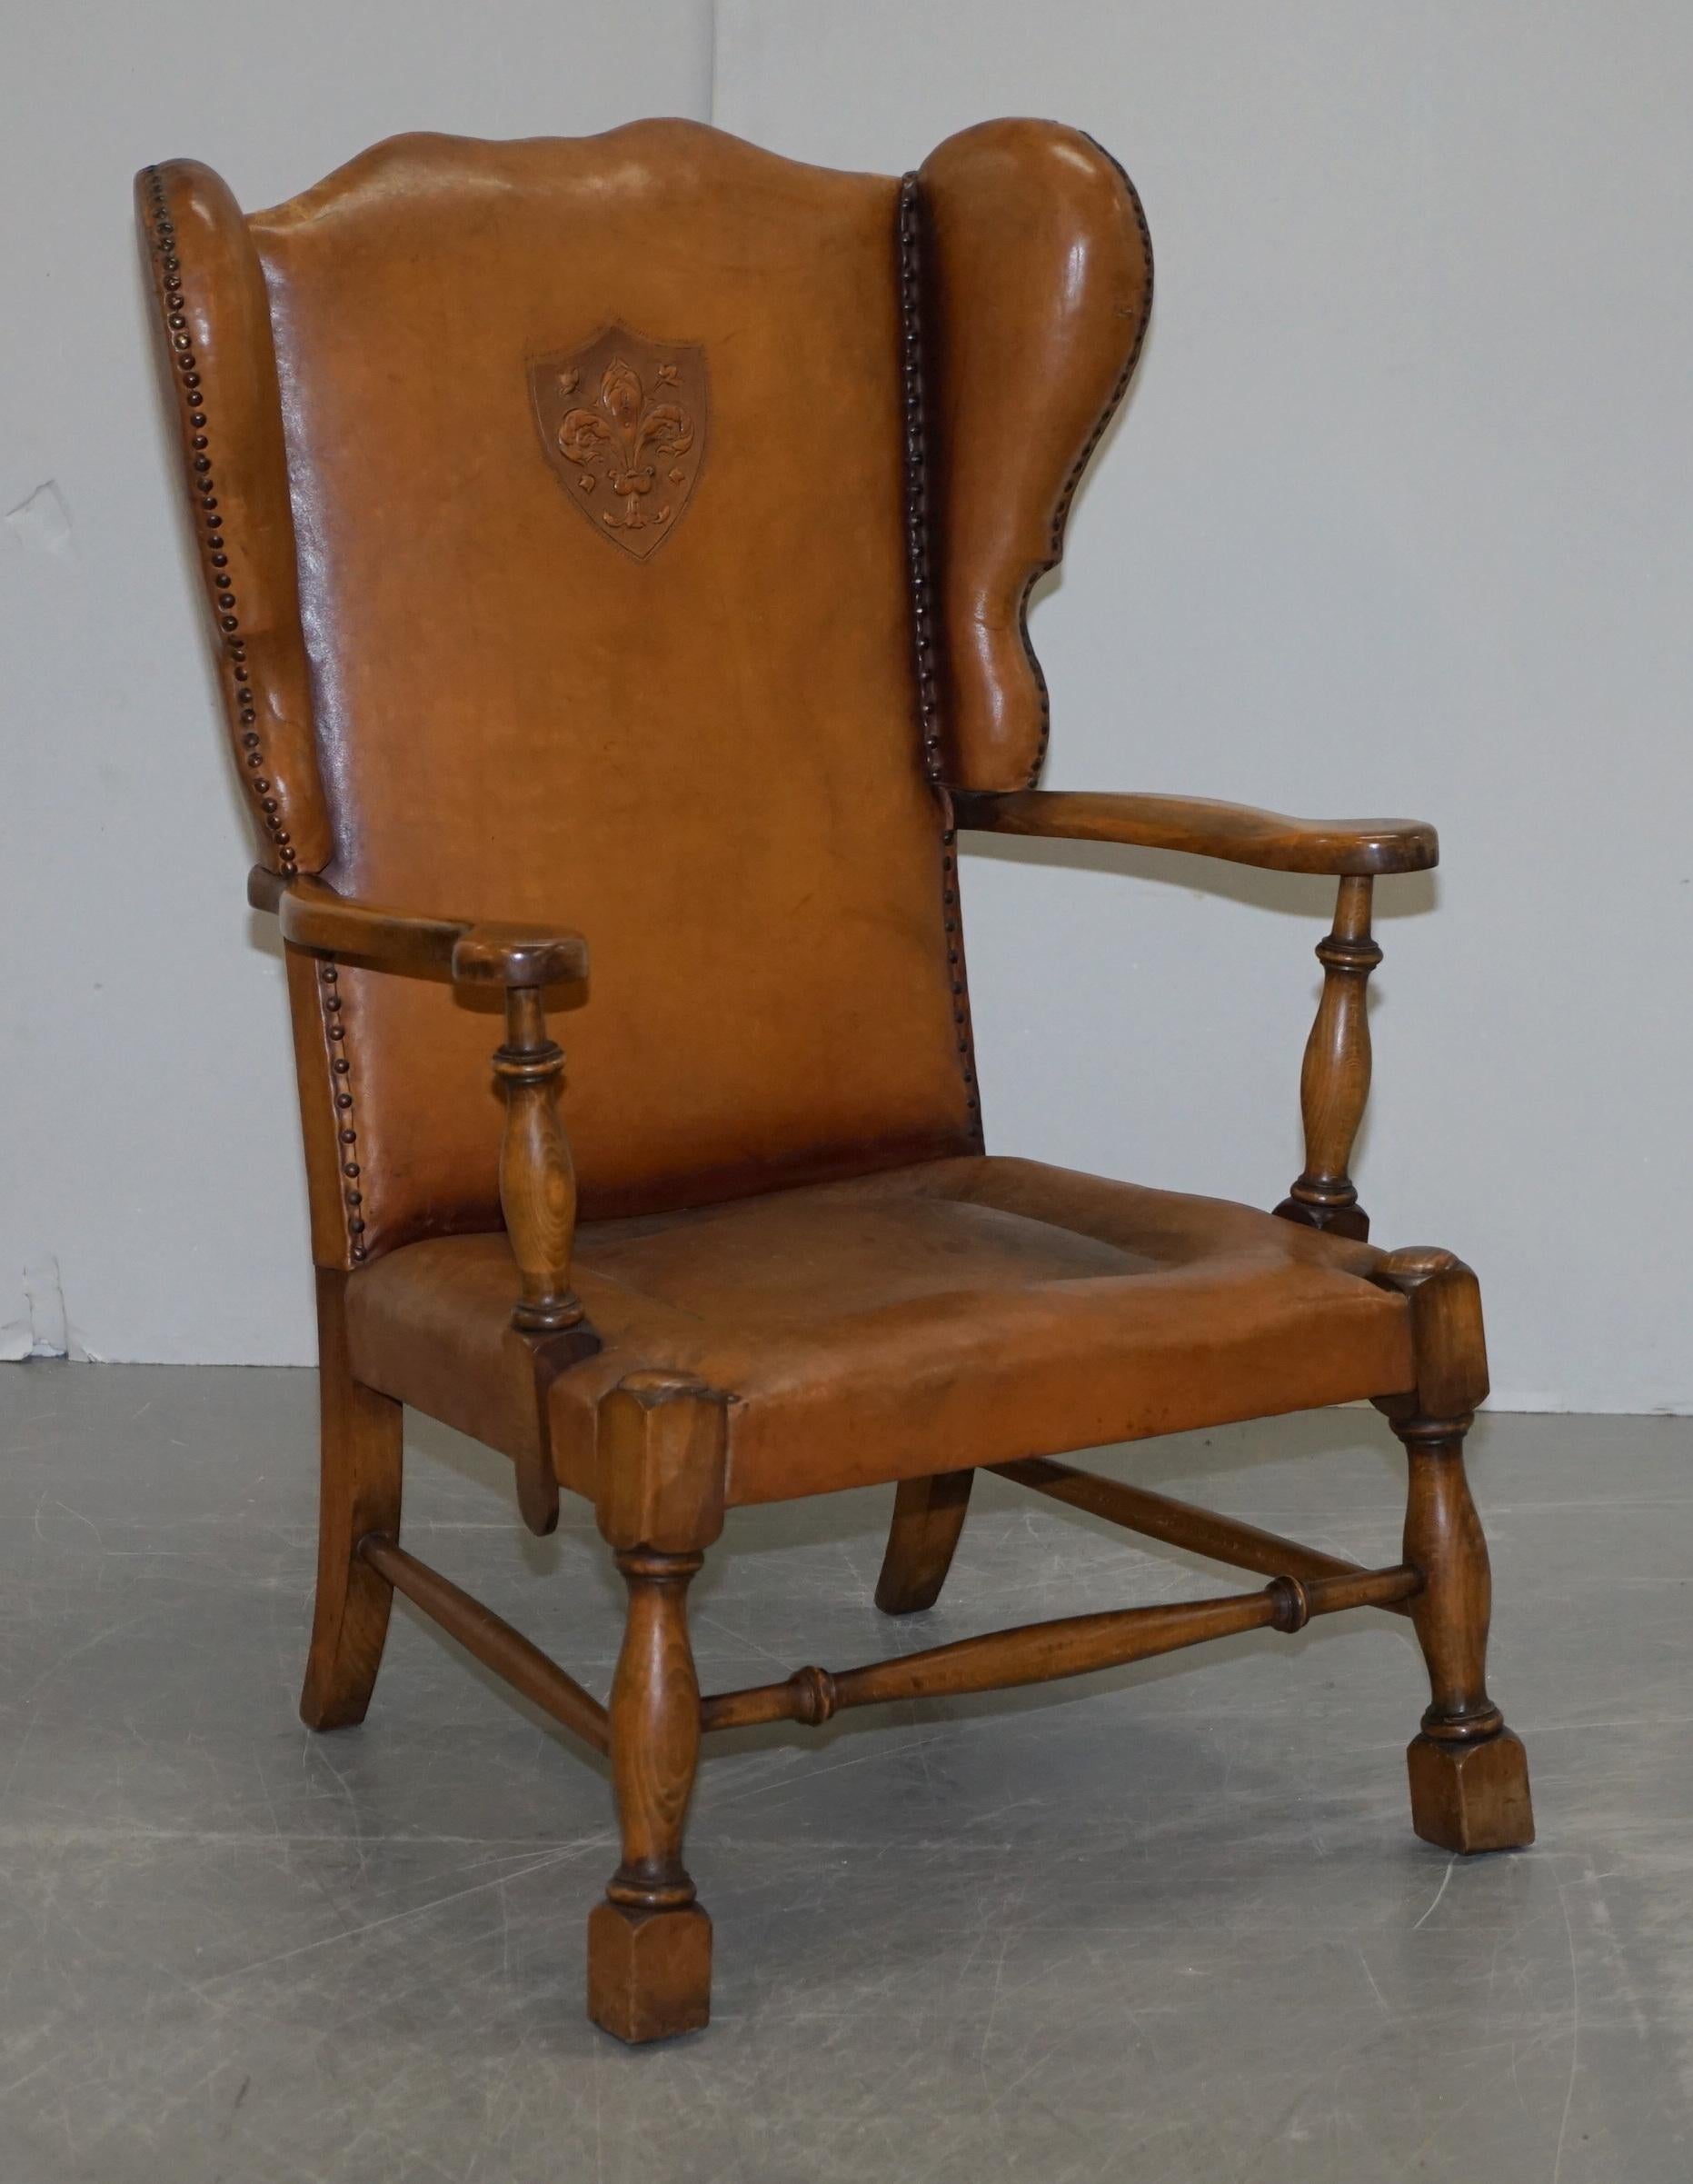 We are delighted to offer for sale this lovely pair of Edwardian wingback armchairs with oak frames and brown leather upholstery that have embossed coat of arms armorial crests in the back

These chairs have the original leather upholstery, one